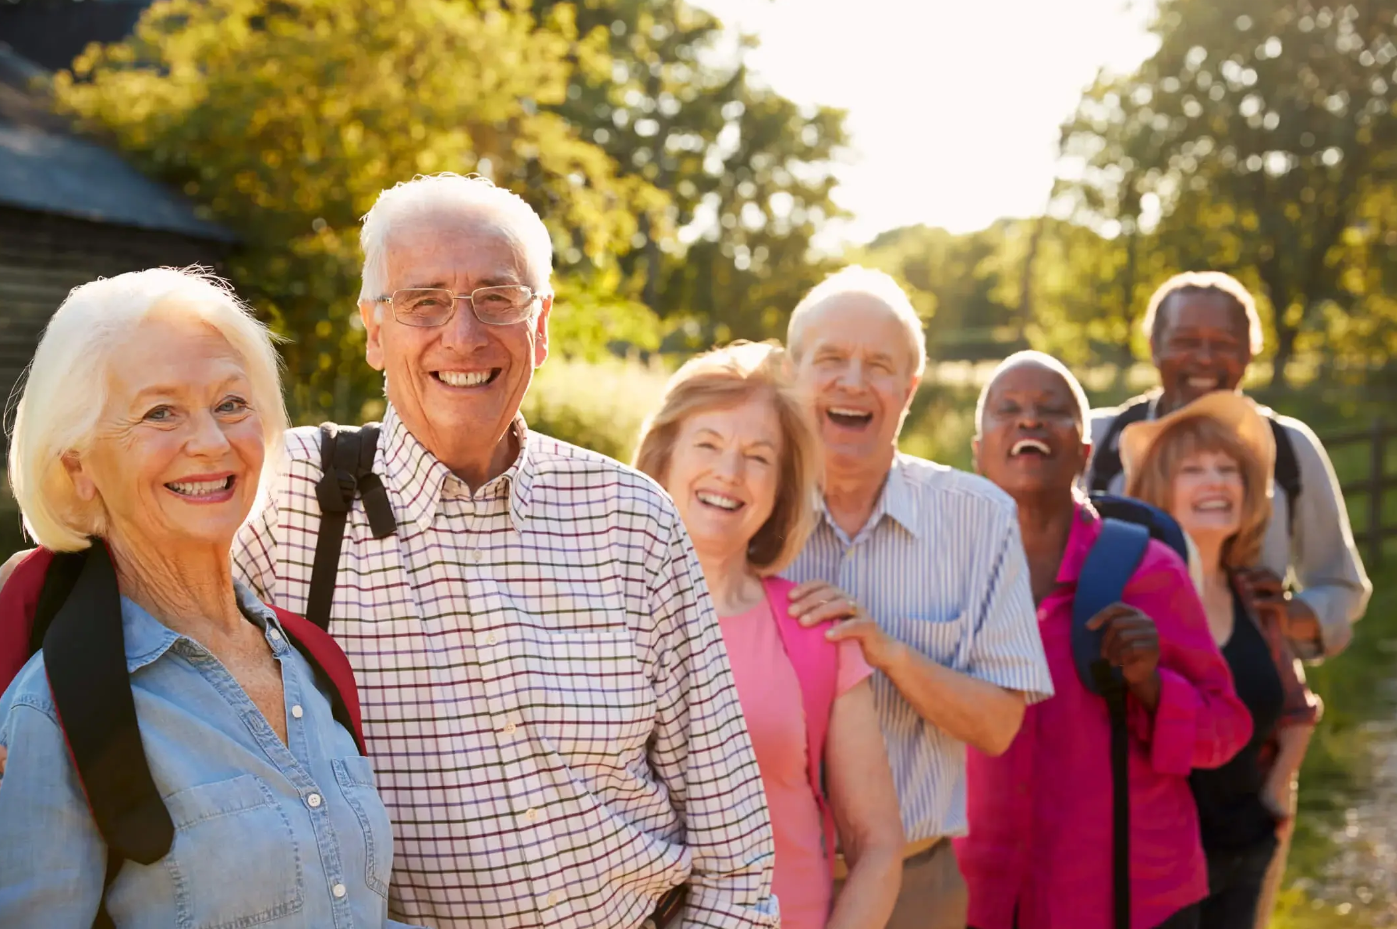 Group outings are an important activity for many community centers, and can also be a great way for older adults to arrange engaging activities with their friends and social groups.